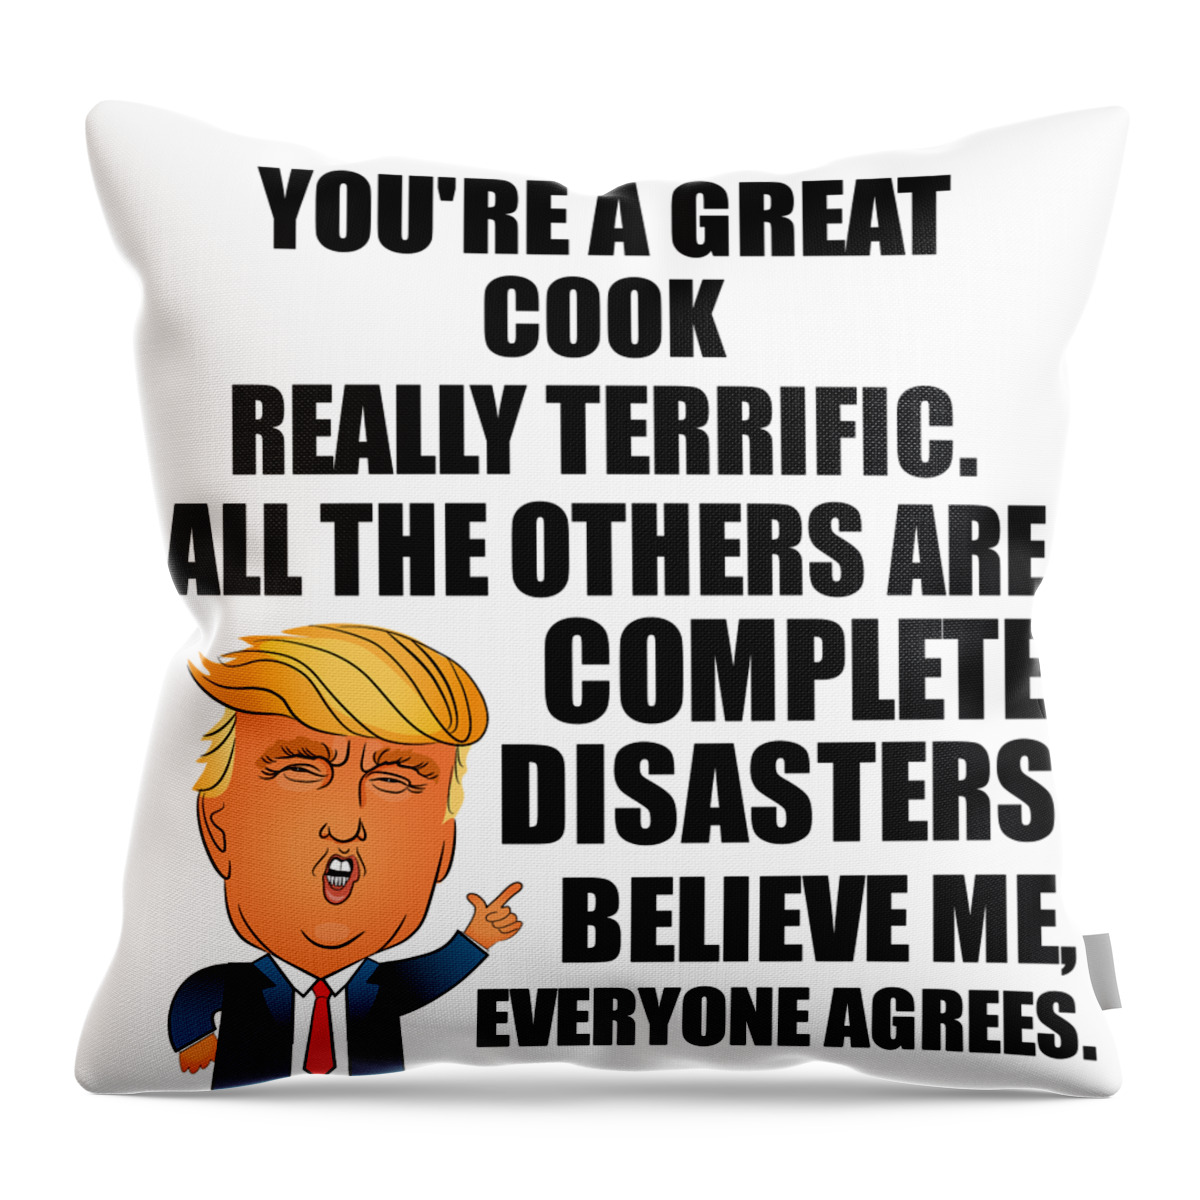 Cook Throw Pillow featuring the digital art Trump Cook Funny Gift for Cook Coworker Gag Great Terrific President Fan Potus Quote Office Joke by Jeff Creation